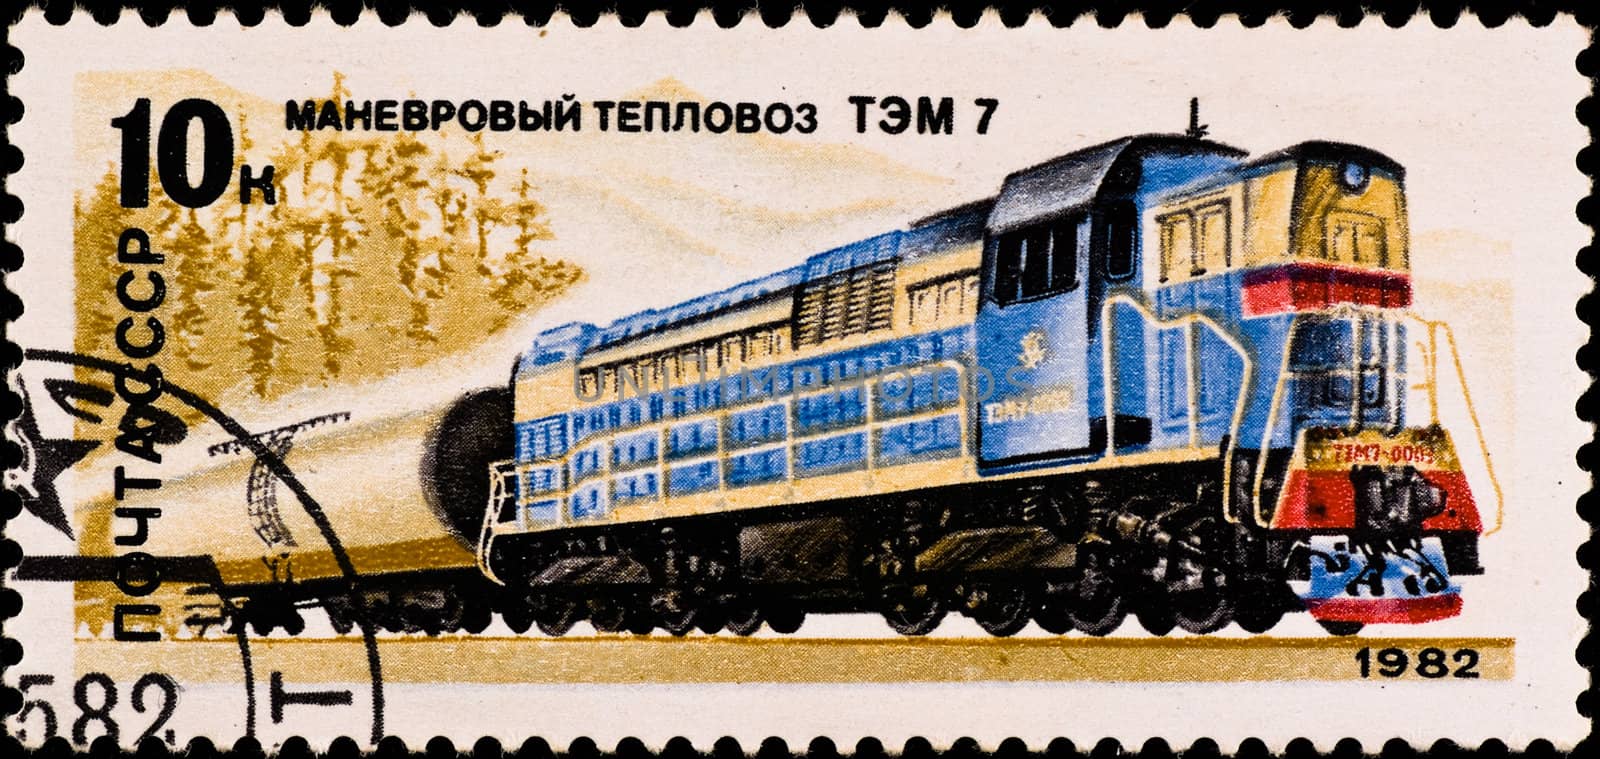 postage stamp shows russian train "TAM-7" by petr_malyshev